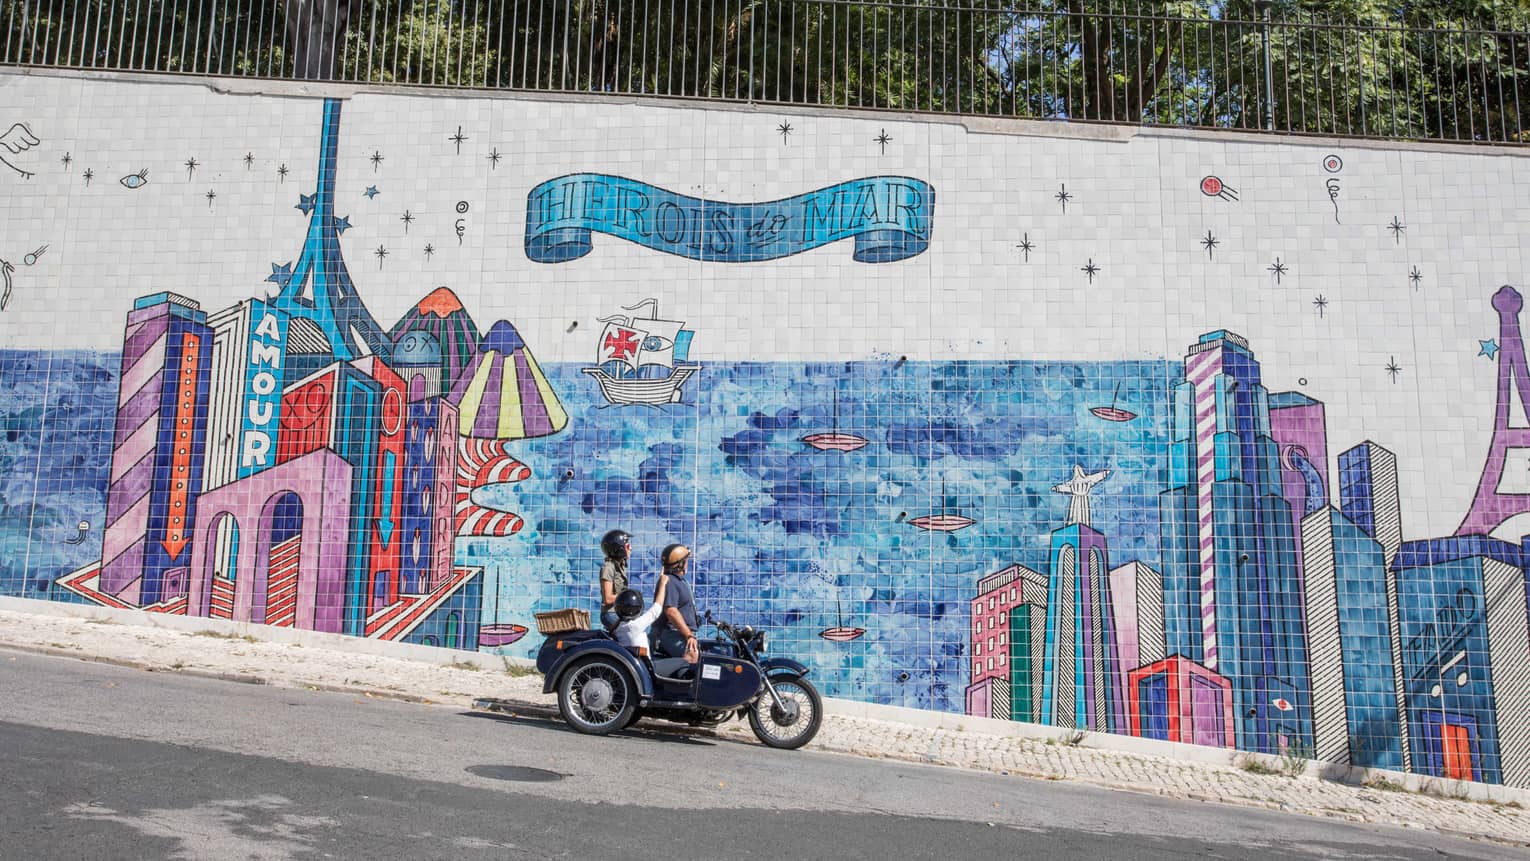 Two adults and a child stop their motorcycle to look at a city mural made of tiles